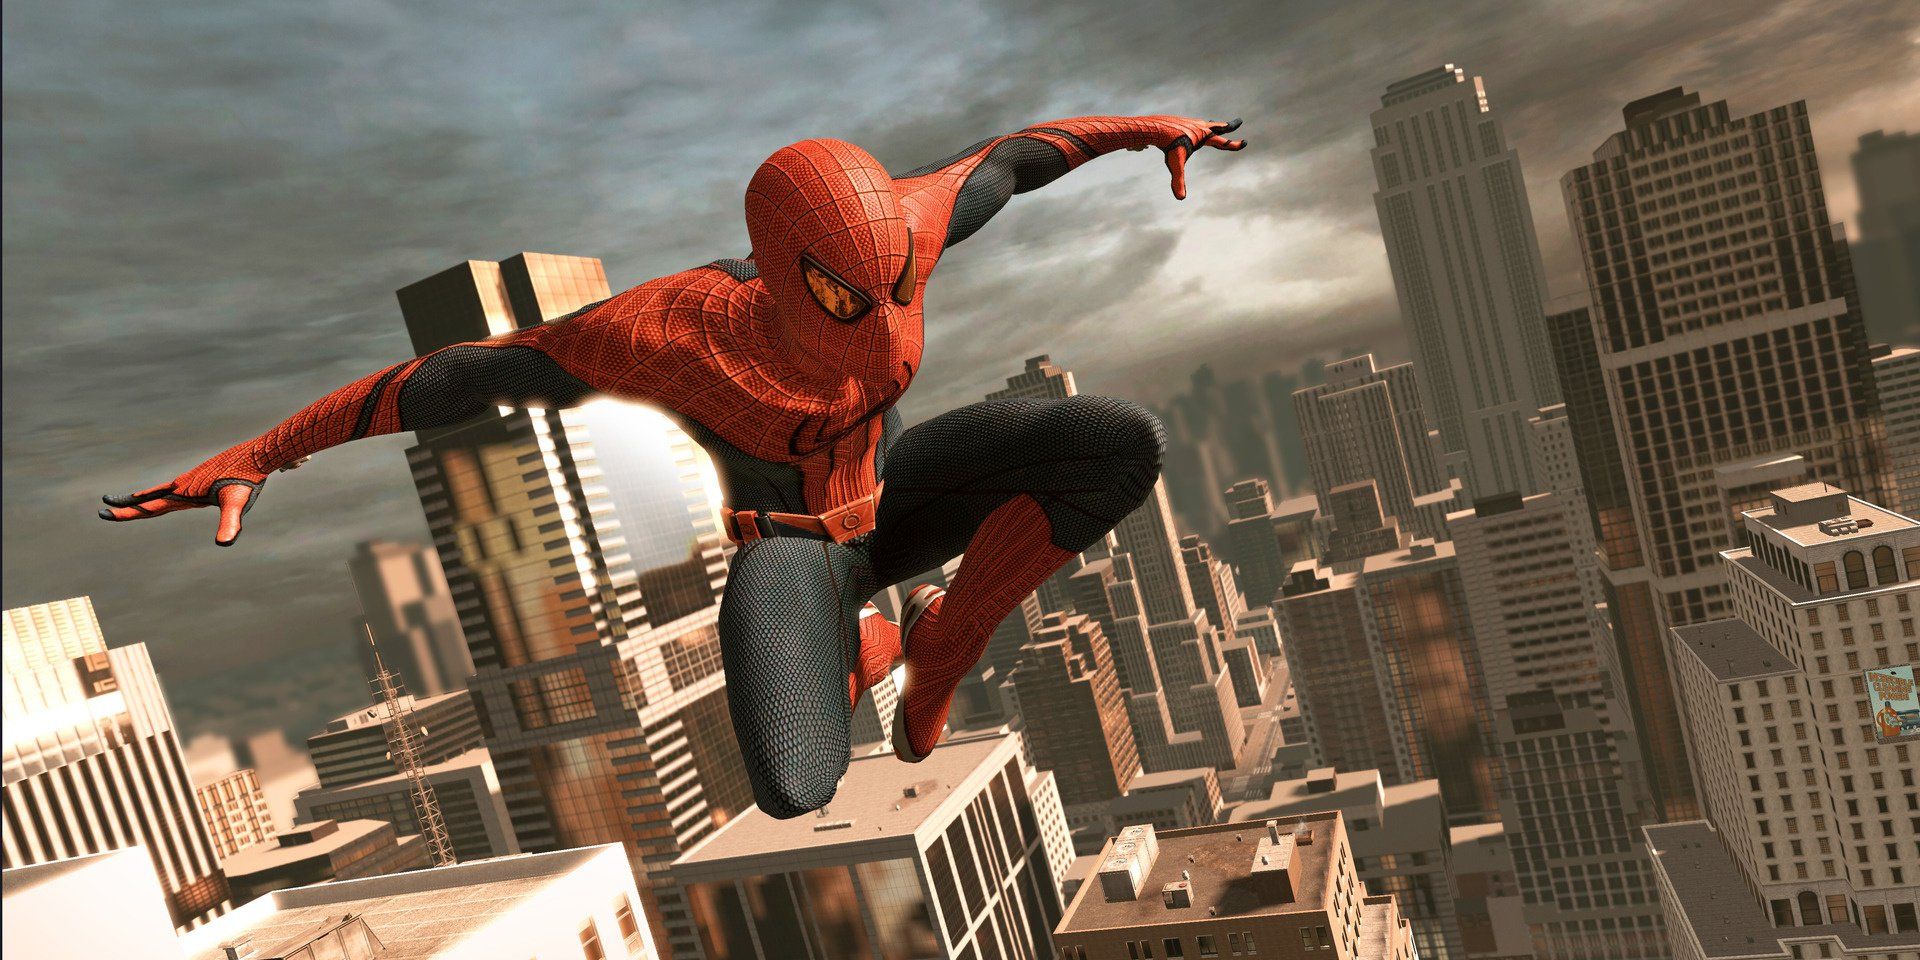 Spider-Man soars through New York in the video game version of The Amazing Spider-Man